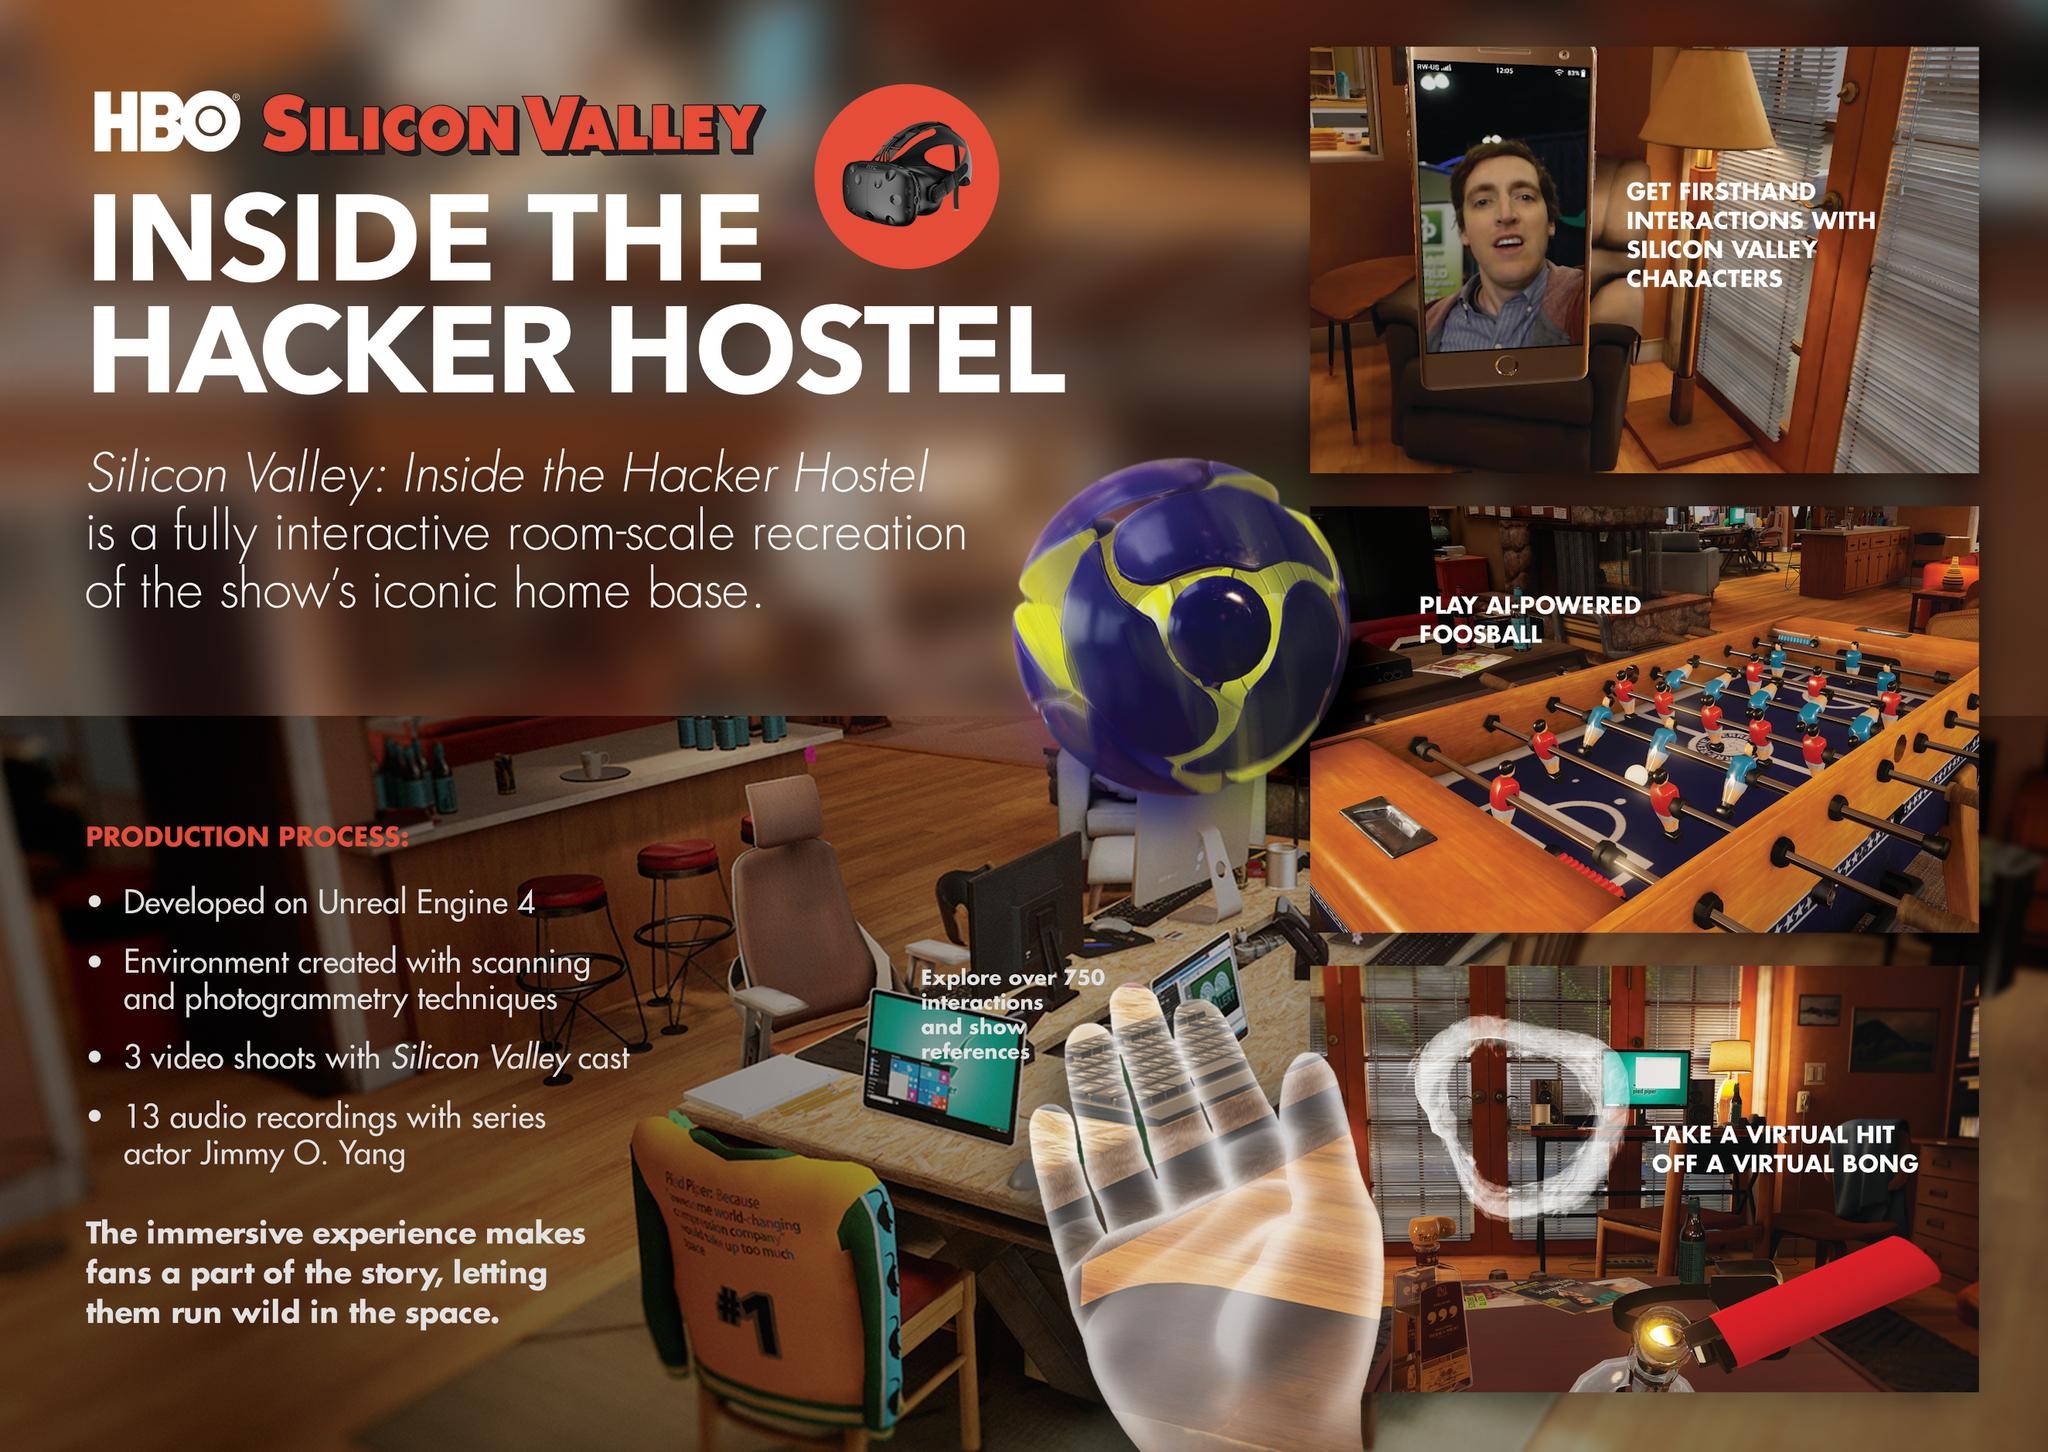 SILICON VALLEY: INSIDE THE HACKER HOSTEL VR